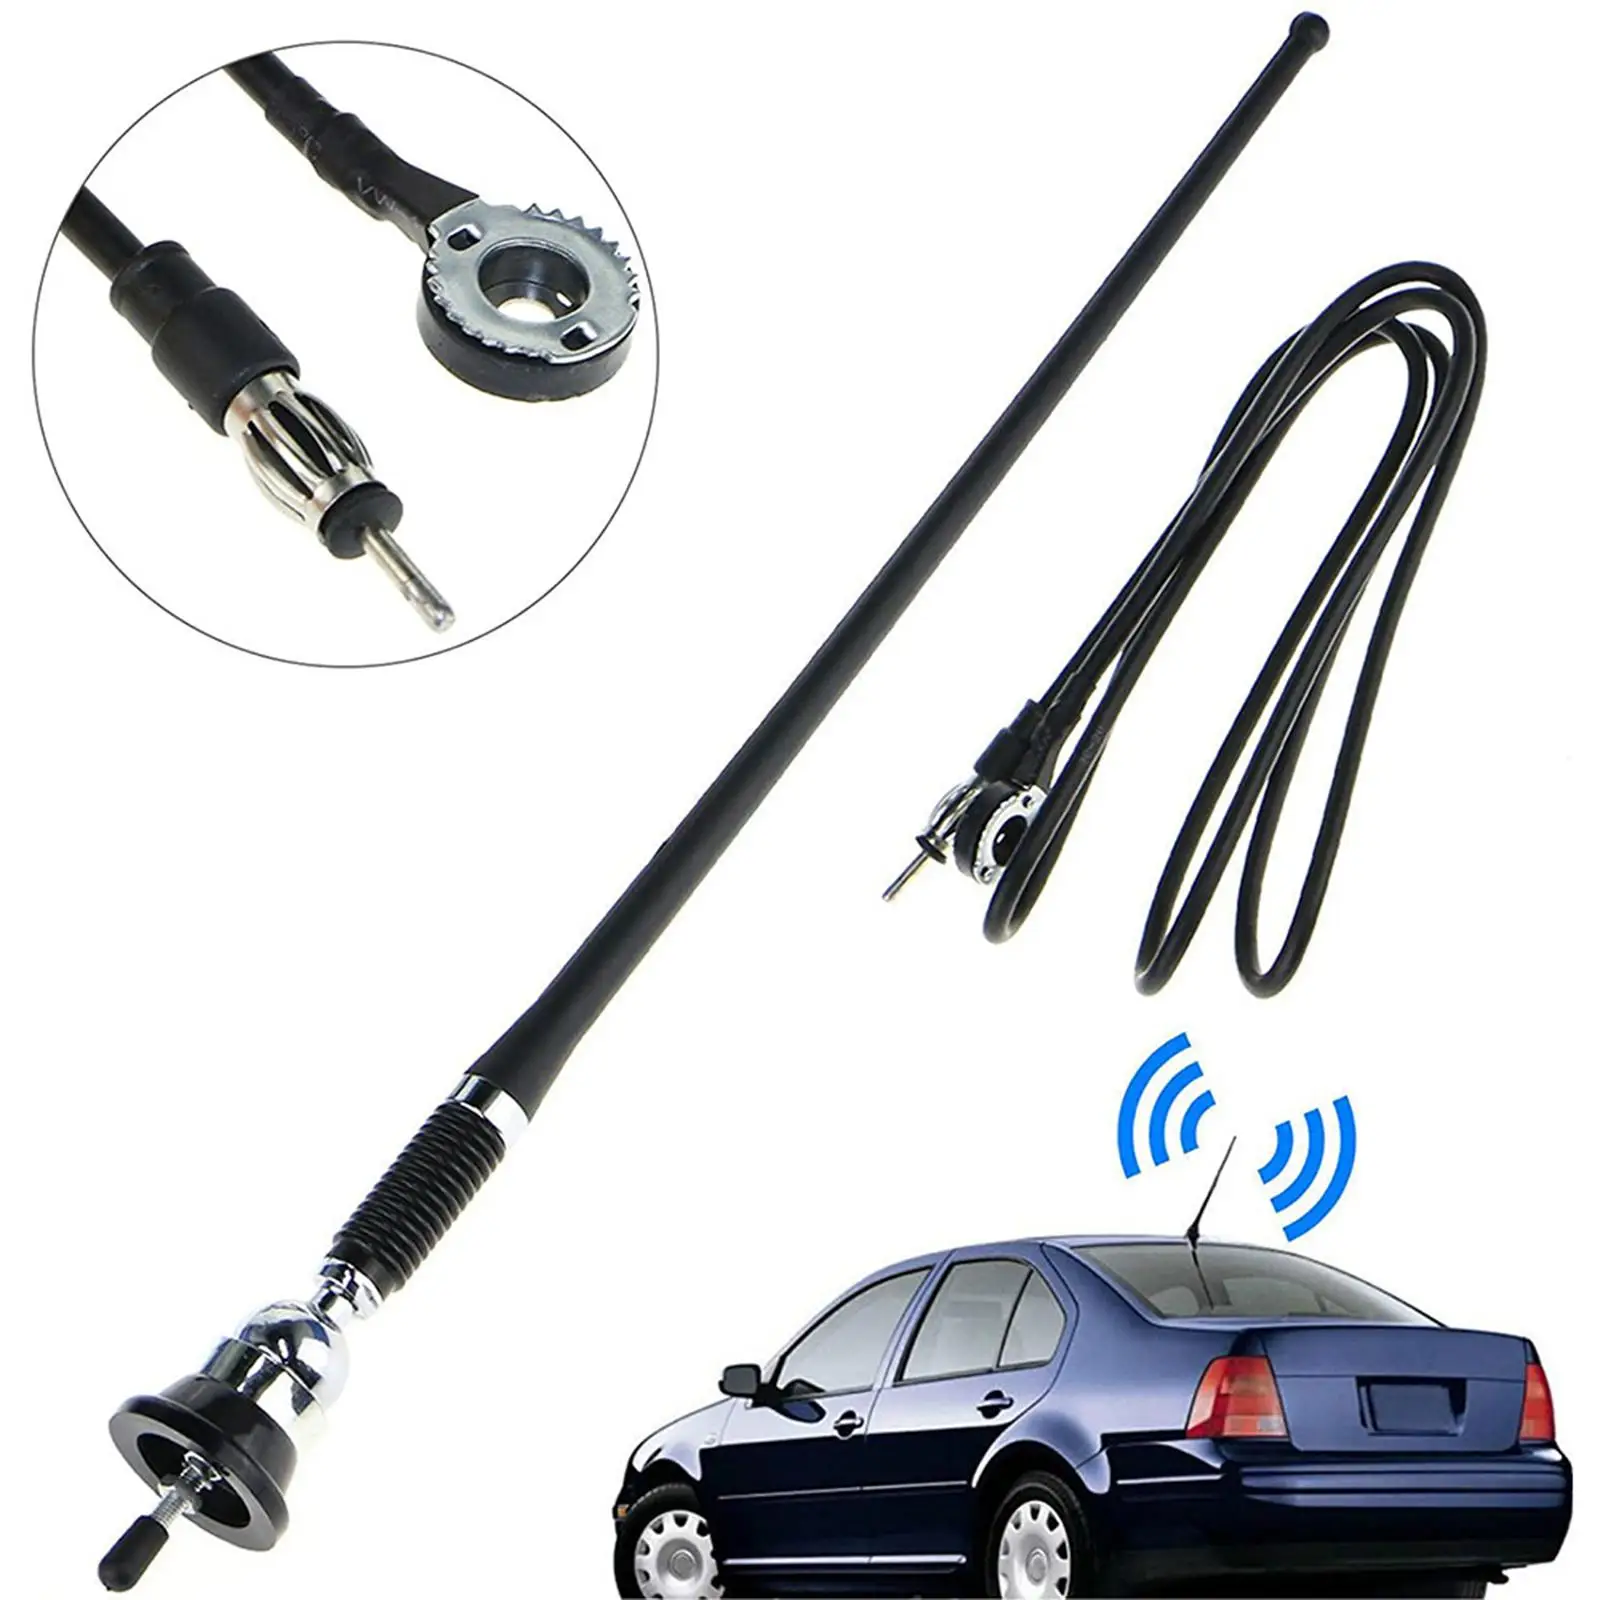 Universal Car Radio Antenna AM FM Roof Fender Mount Replacement Auto Aerial Flexible Mast for Truck SUV Vehicles Automotive